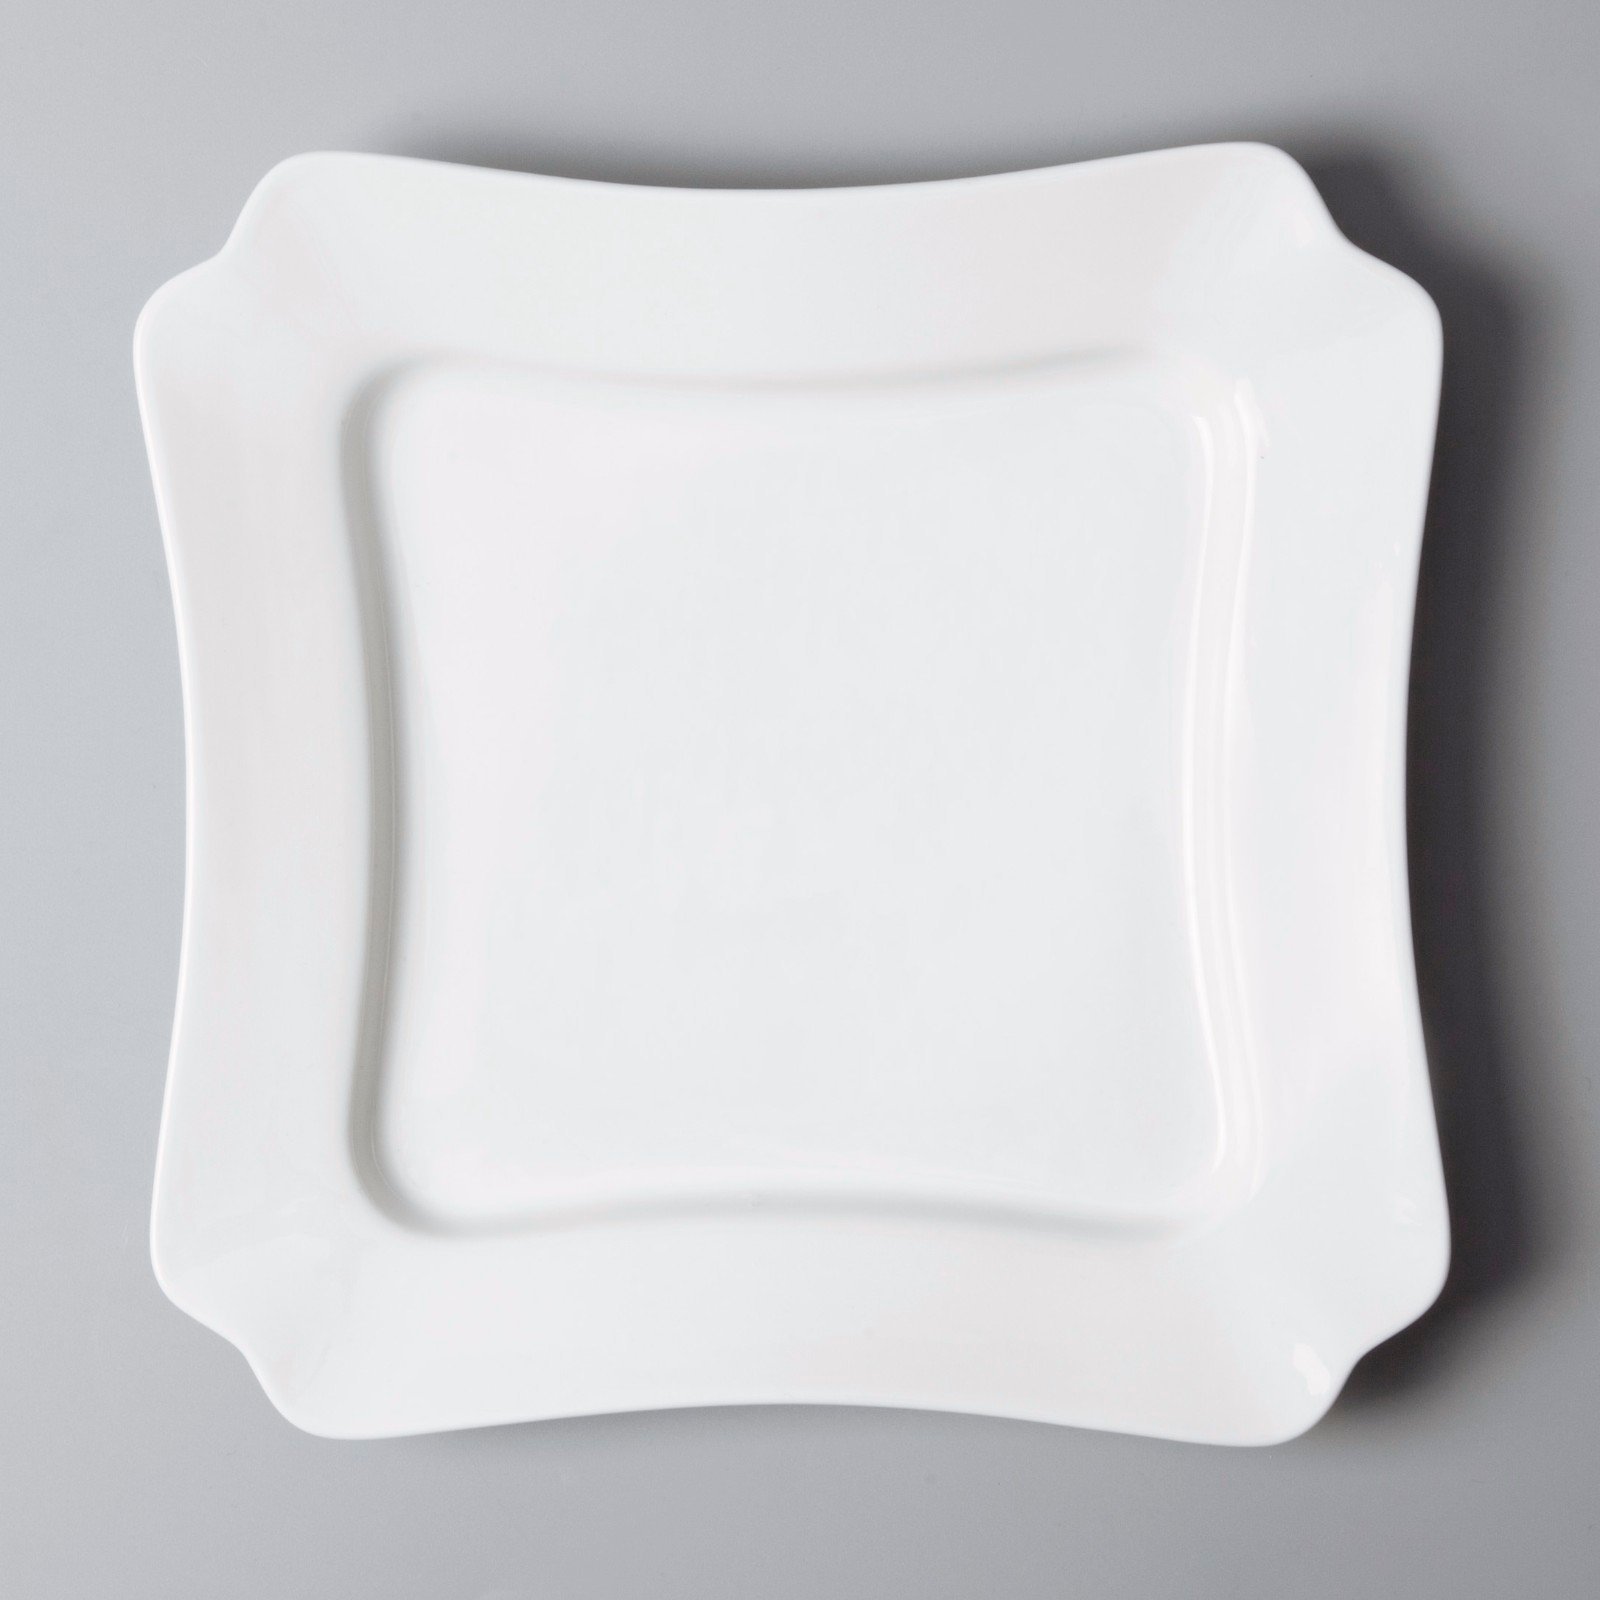 restaurant dining ware french style for home Two Eight